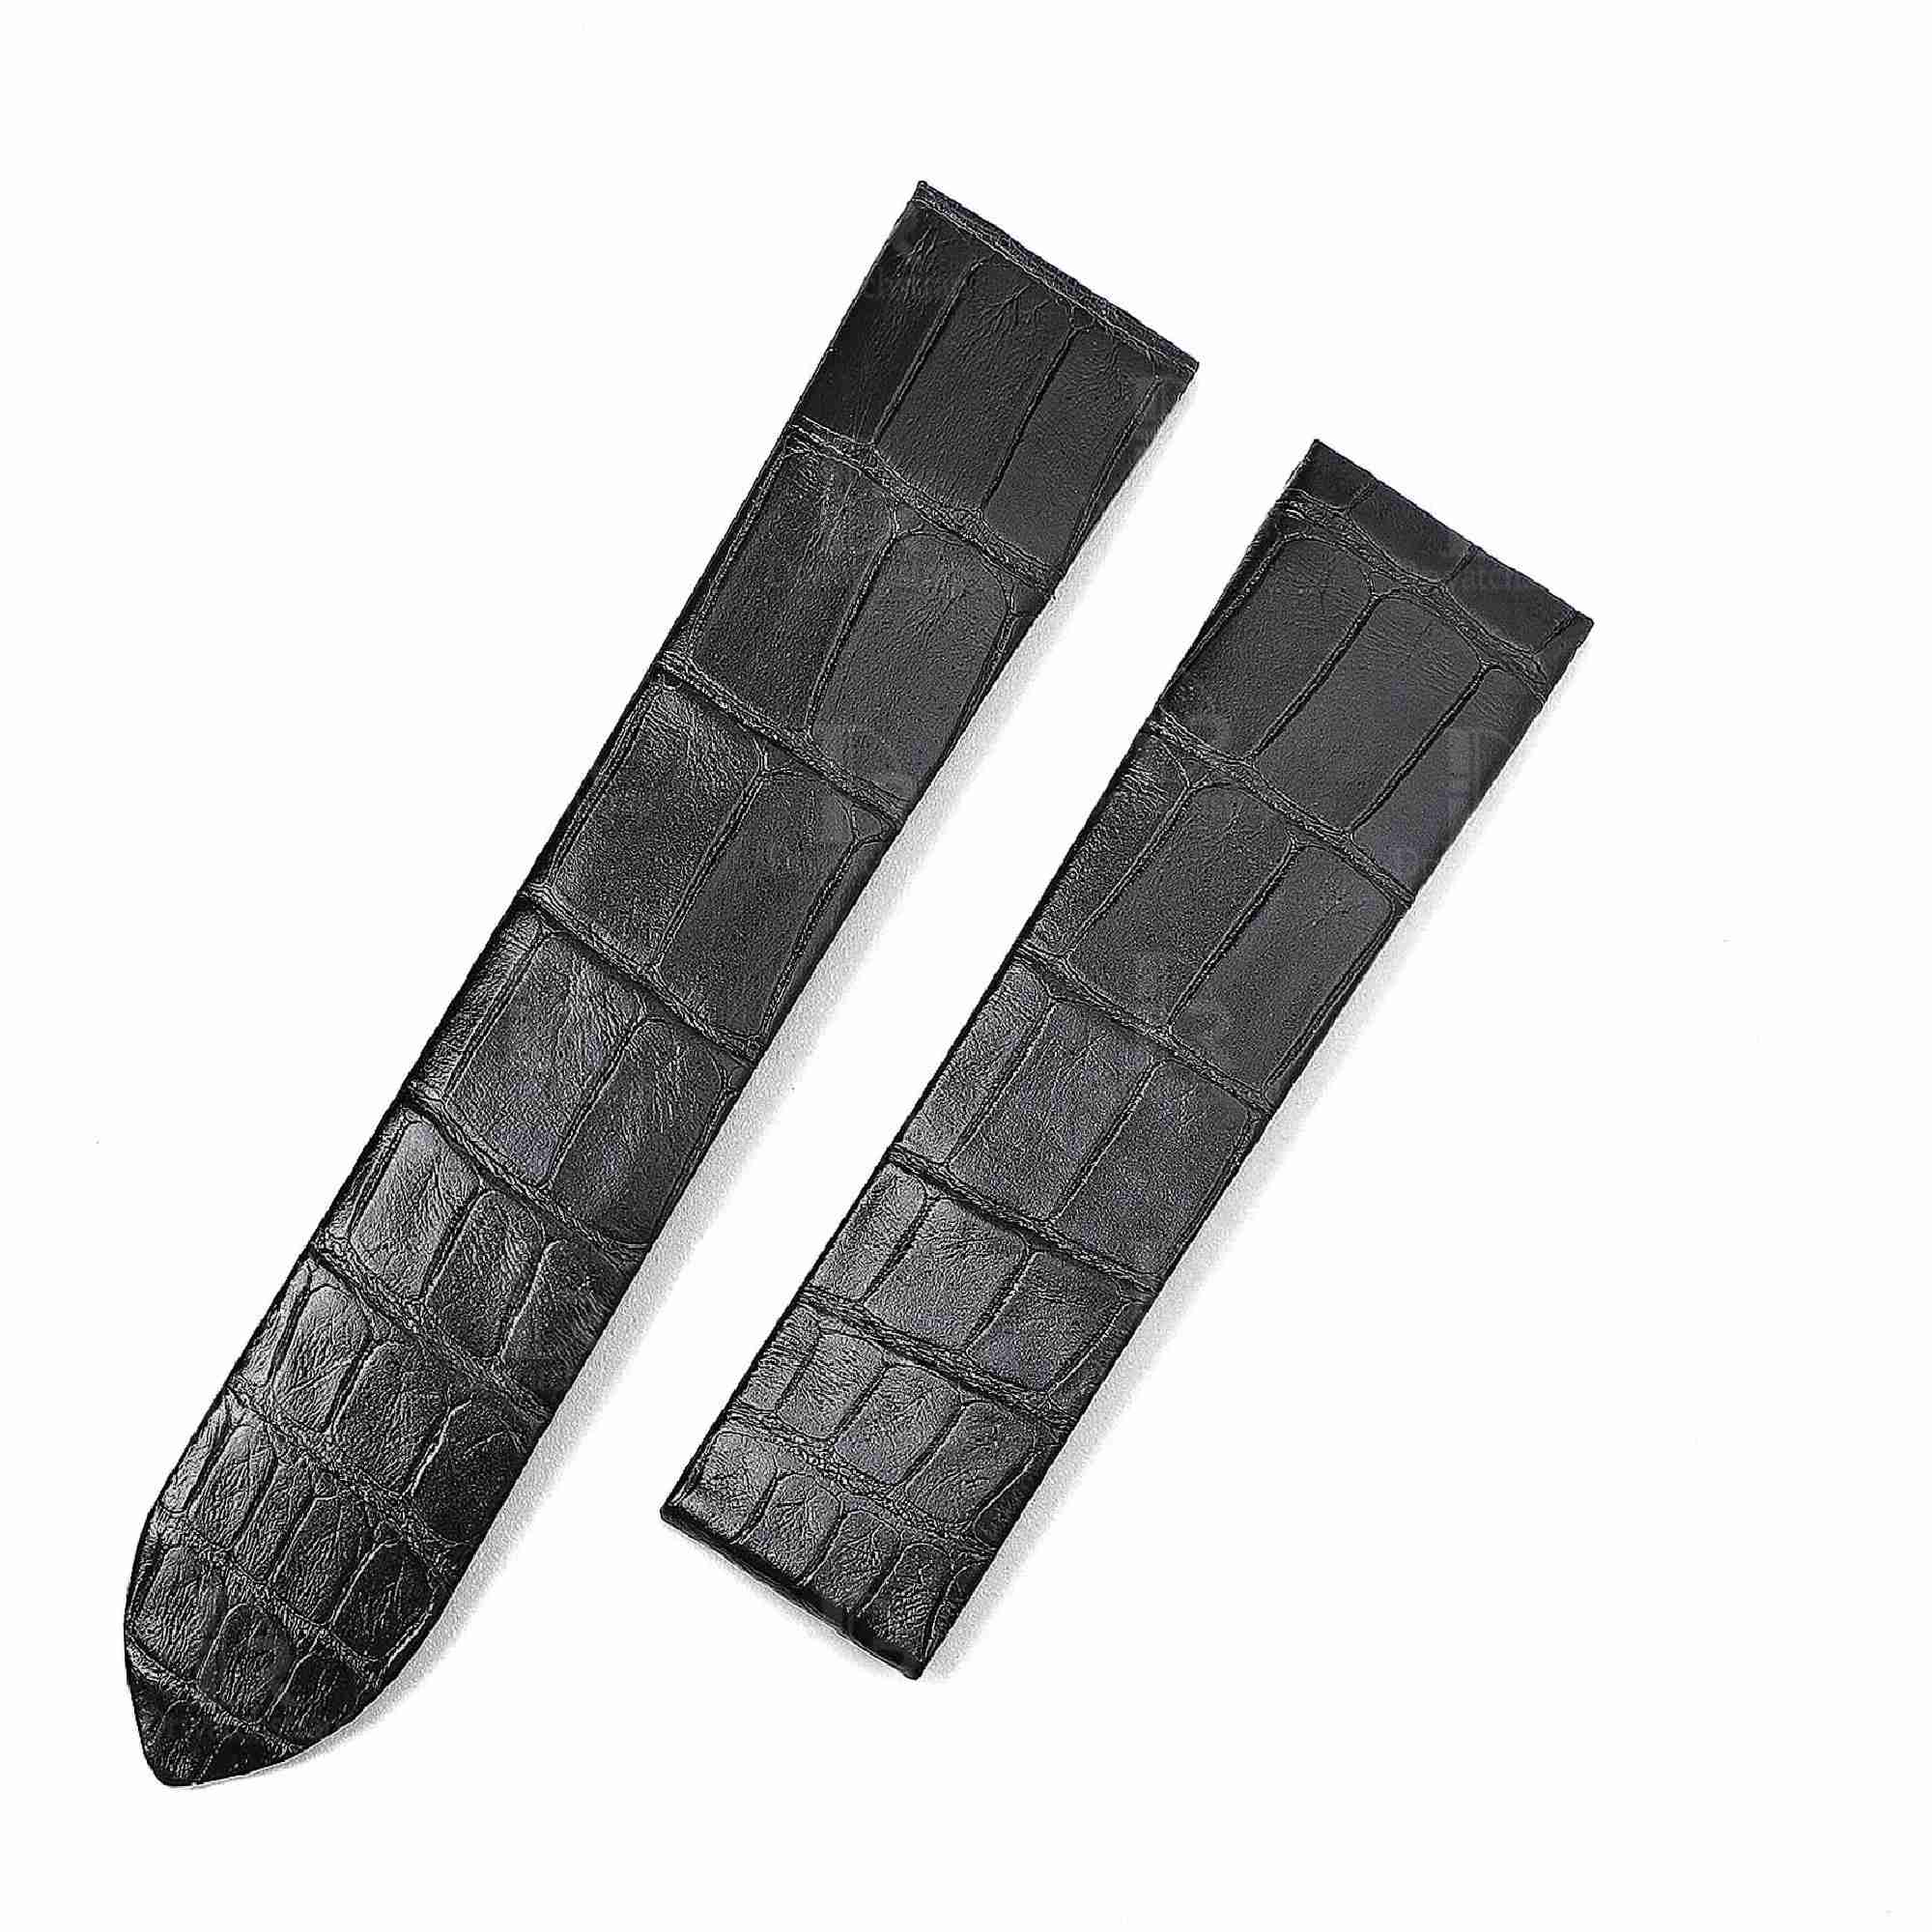 Best quality OEM custom genuine alligator leather black watch Cartier santos dumont strap and watch band replacement watch bands for sale